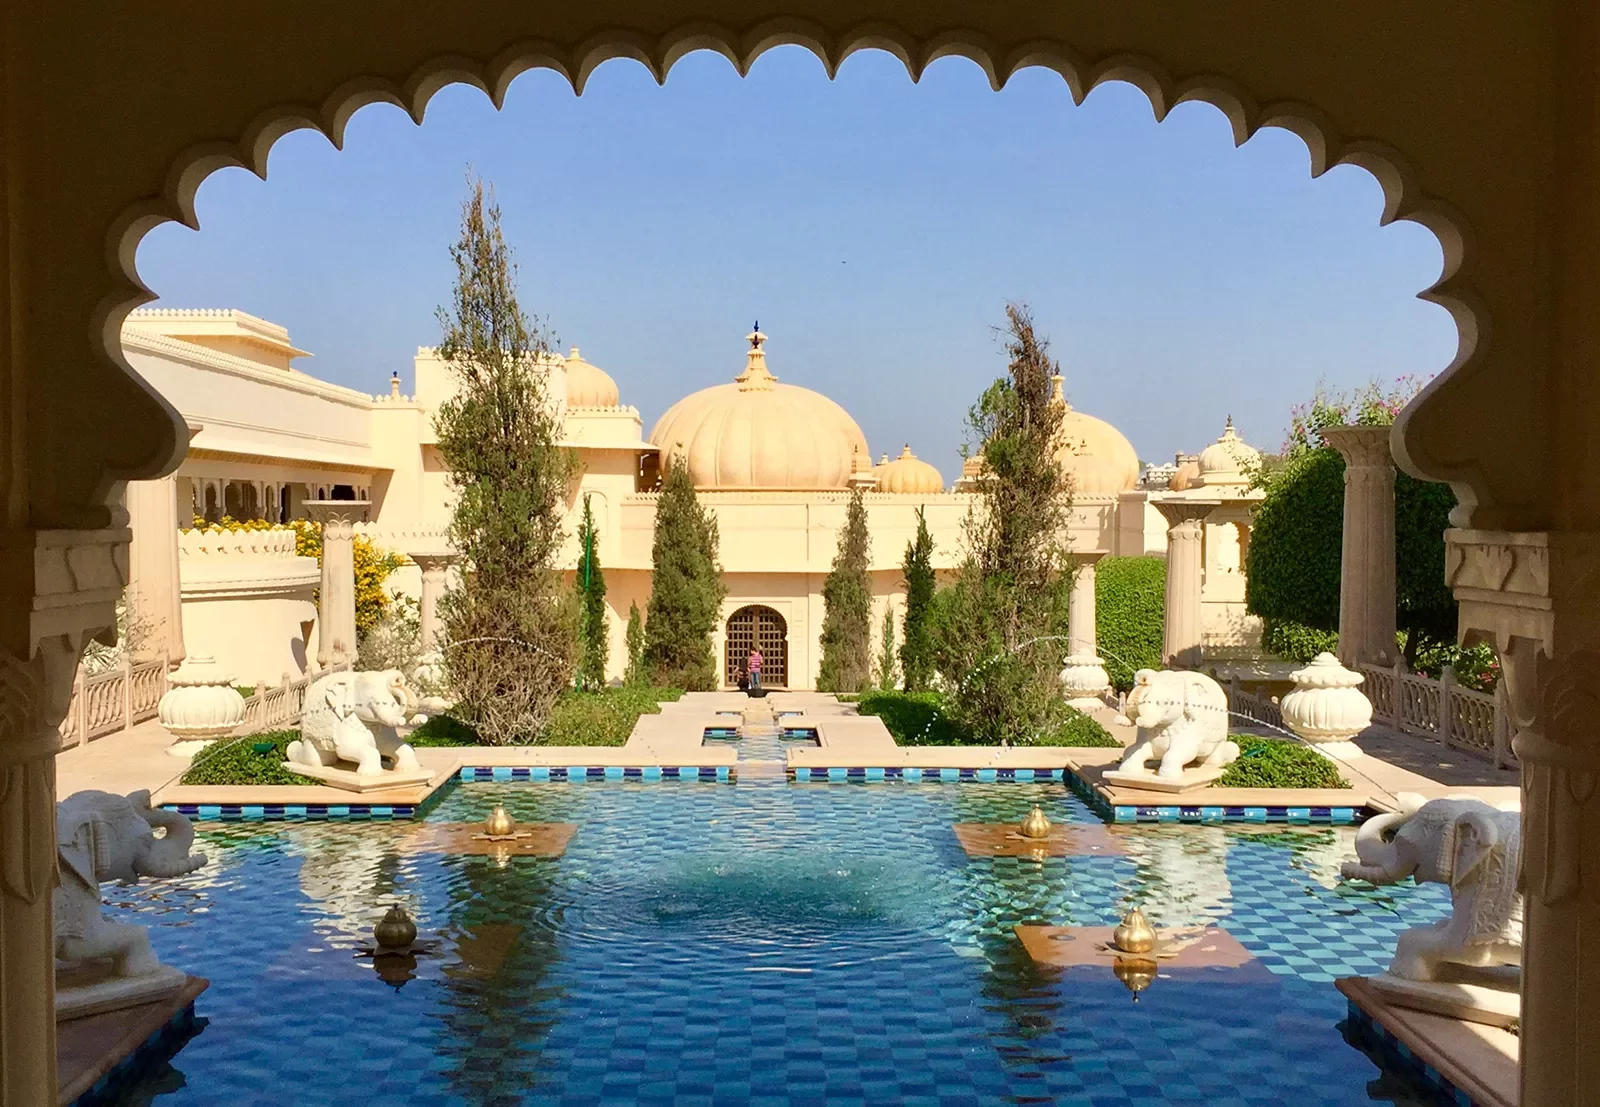 Hotel pool as seen through an ornate arch in India